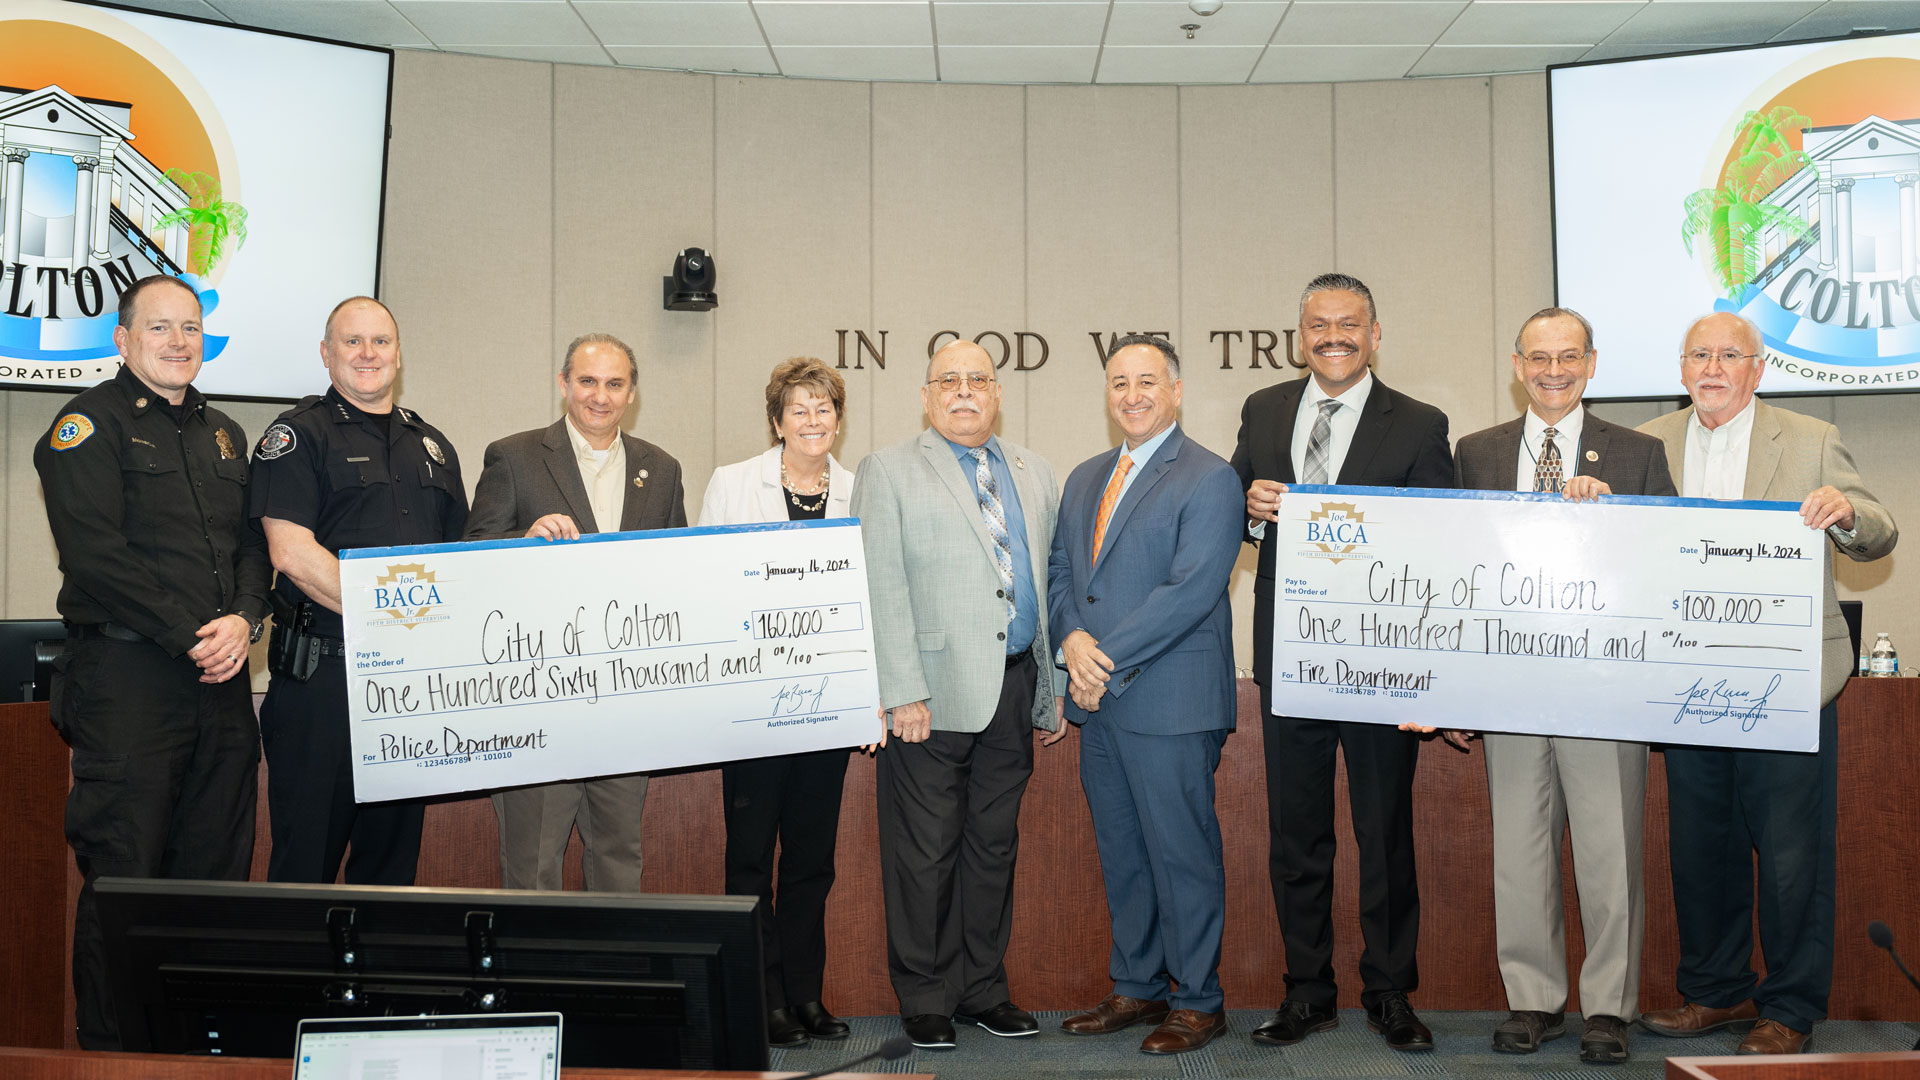 Supervisor Baca, Jr with representatives from the City of Colton at a check presentation ceremony